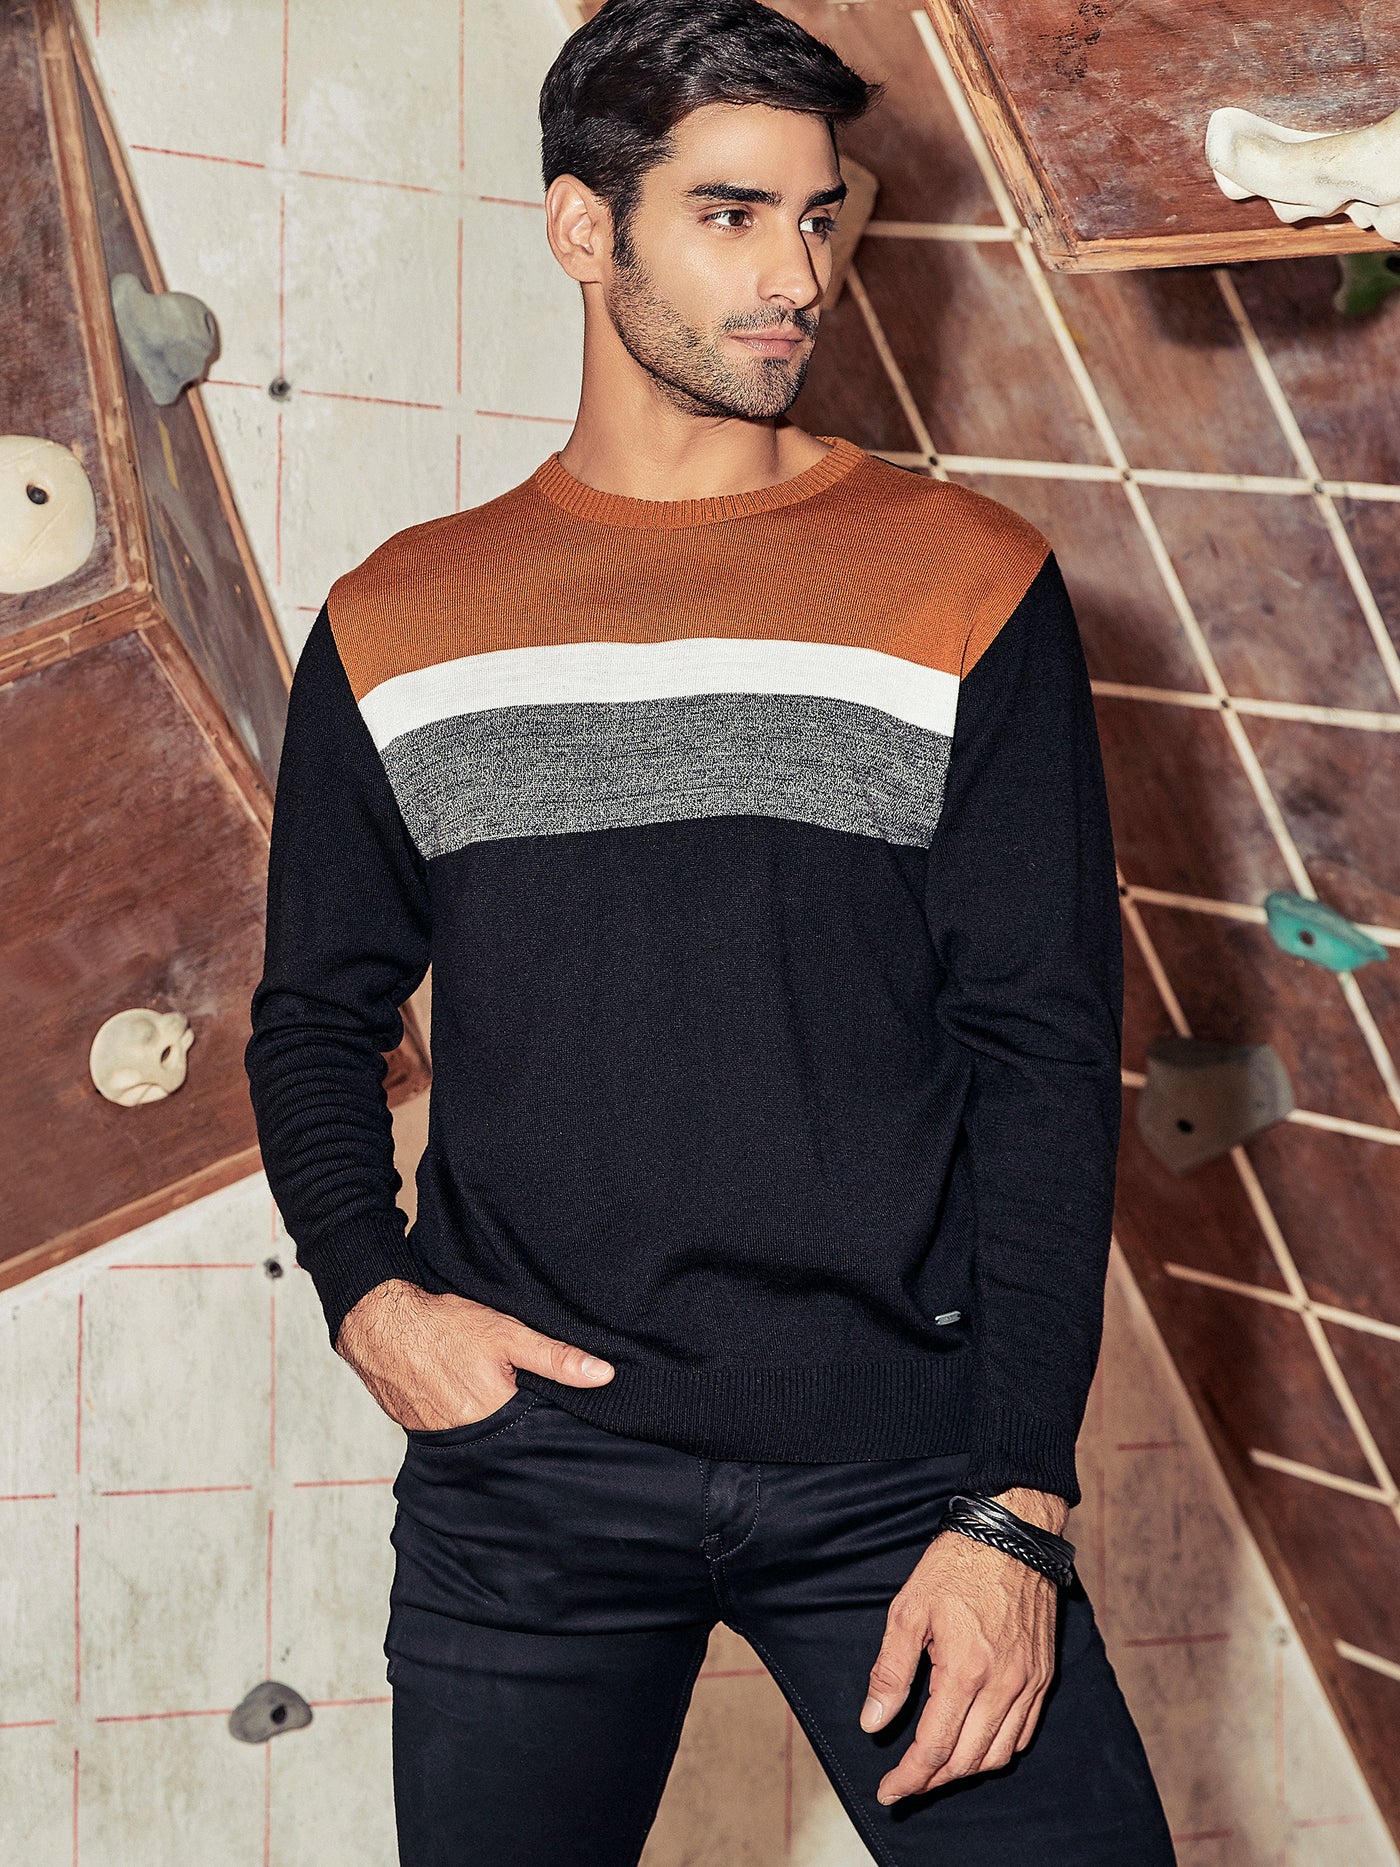 Colorblocked Round Neck Sweater - Men Sweaters